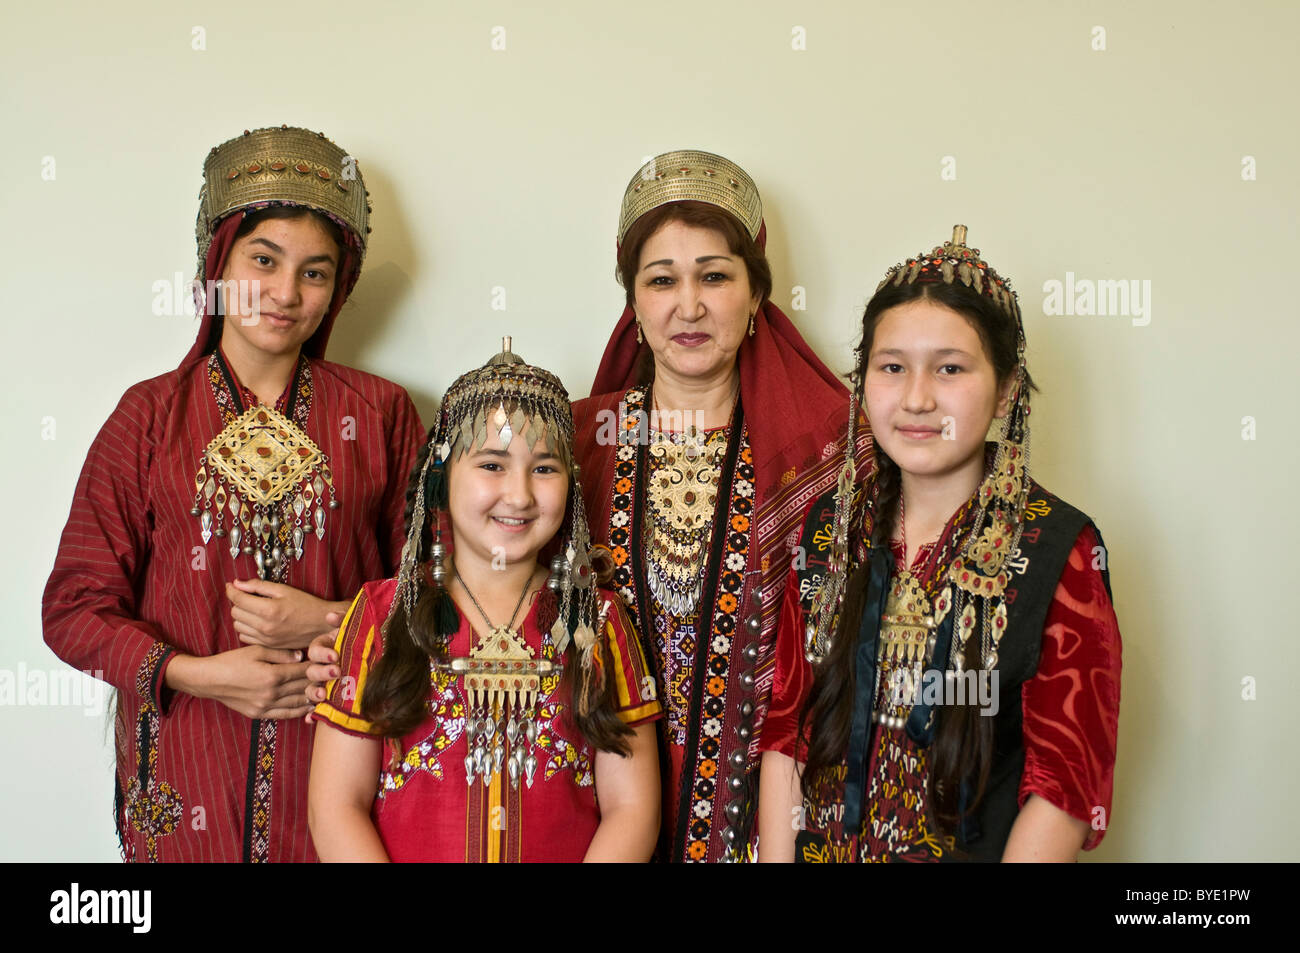 Group picture of Turkmen family in traditional costume, Turkmenistan, Central Asia Stock Photo